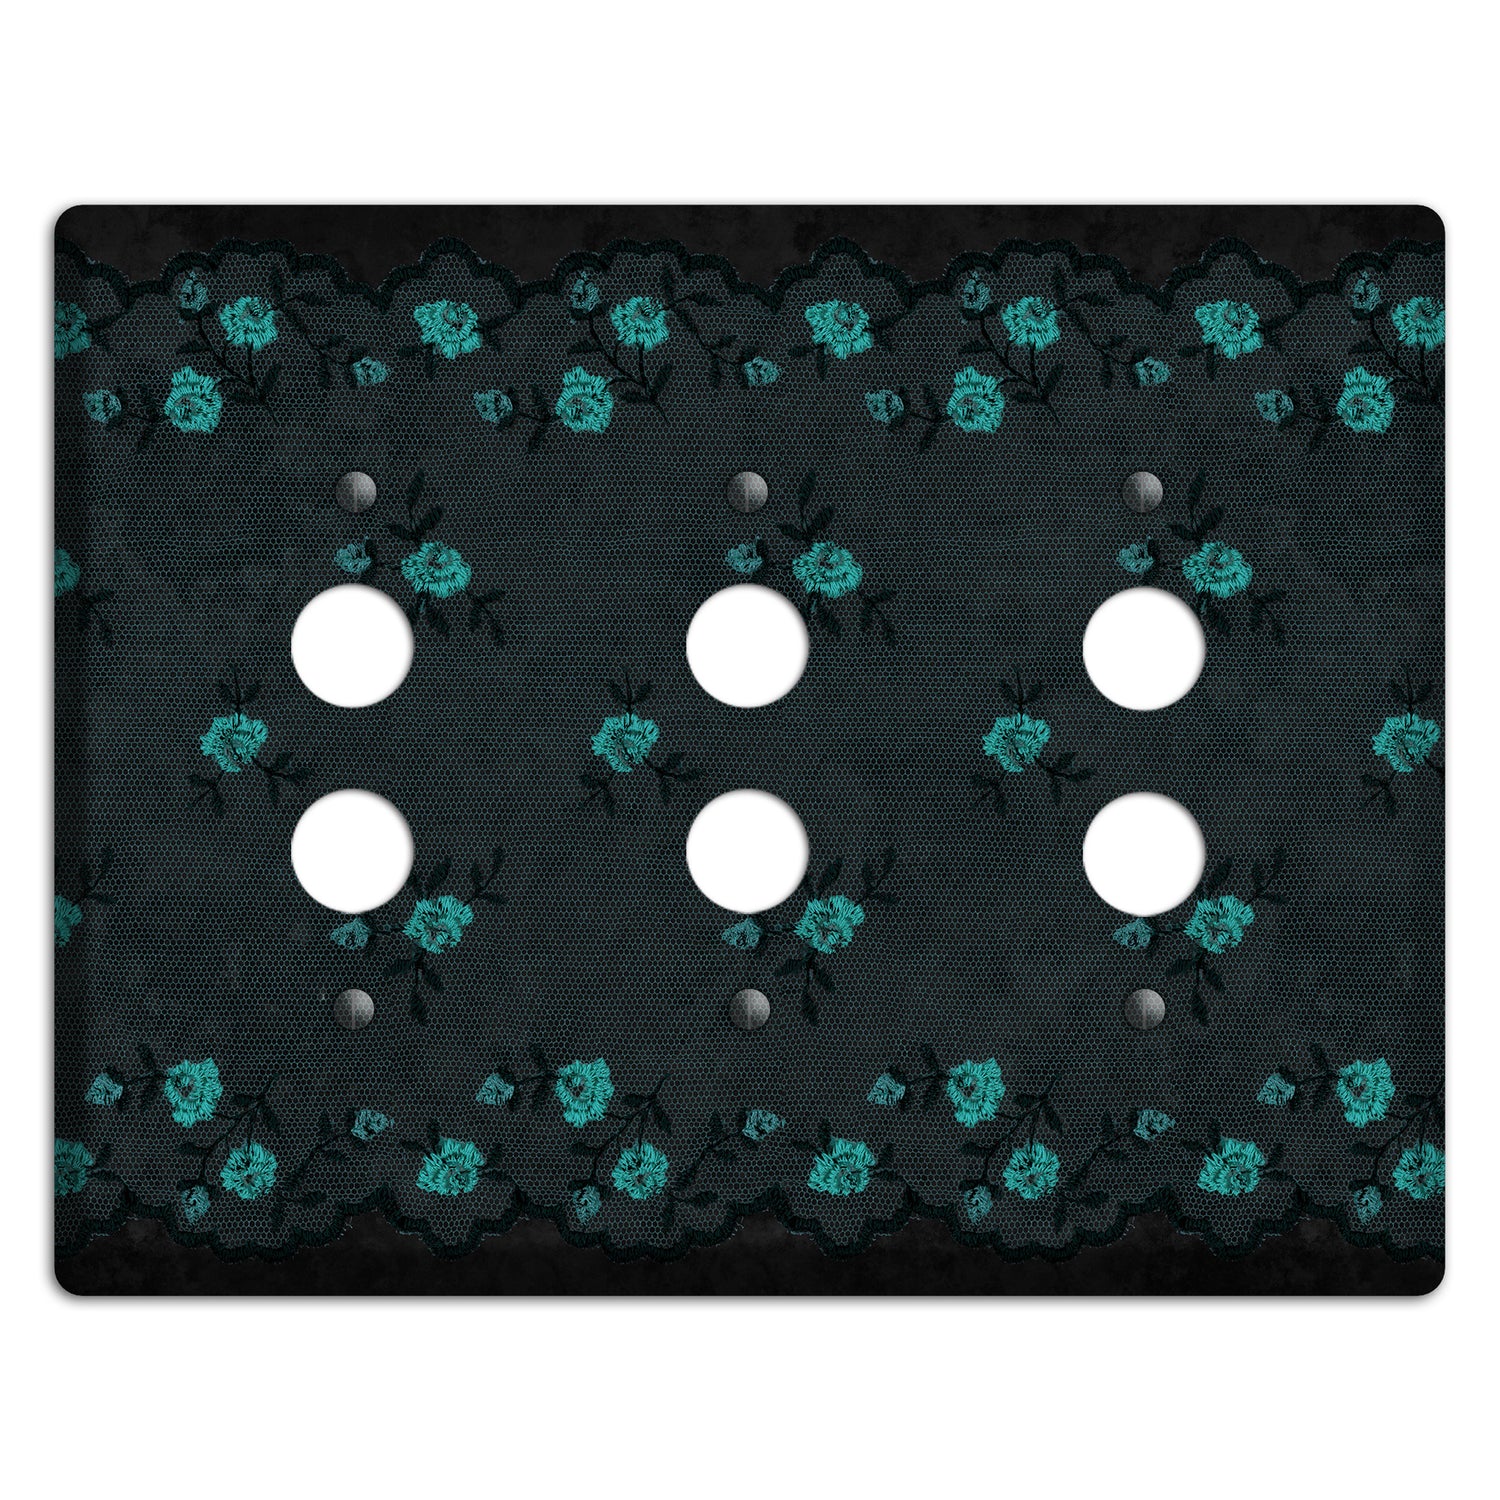 Embroidered Floral Black 3 Pushbutton Wallplate